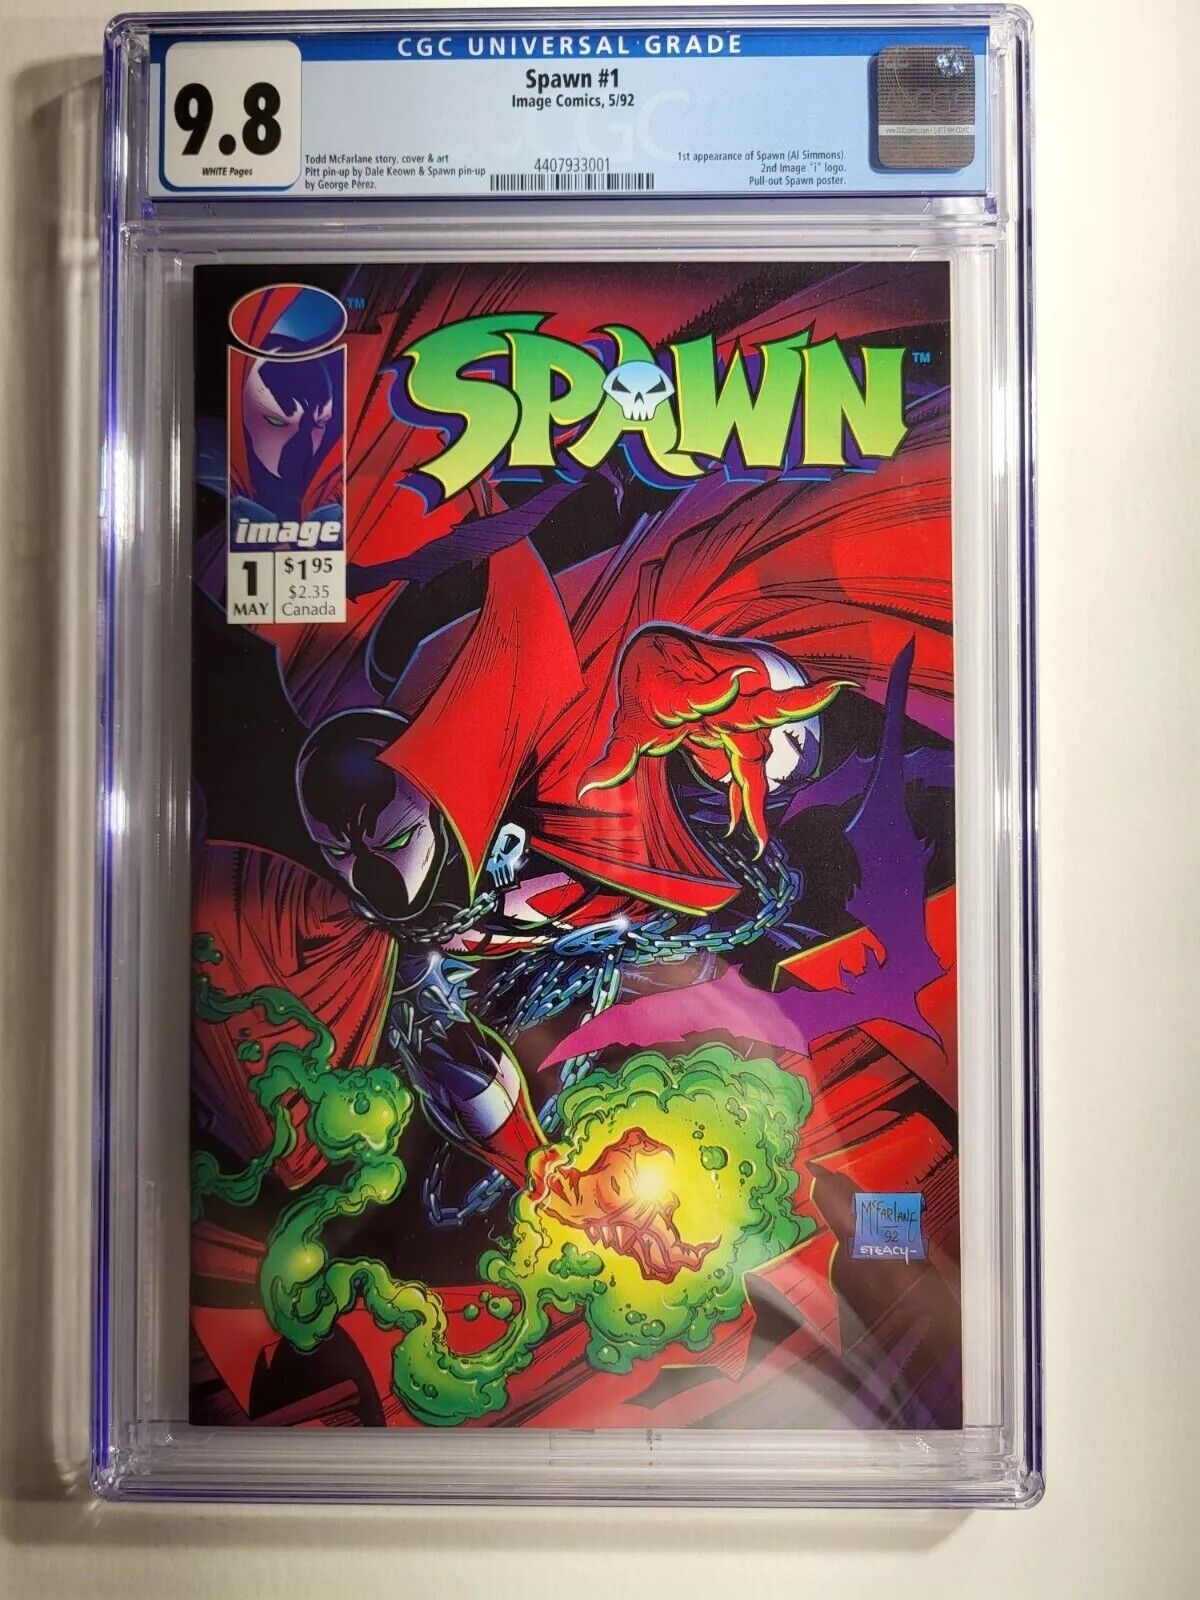 Spawn #1 Issue 9.8 CGC Graded Image Comic by Todd McFarlane